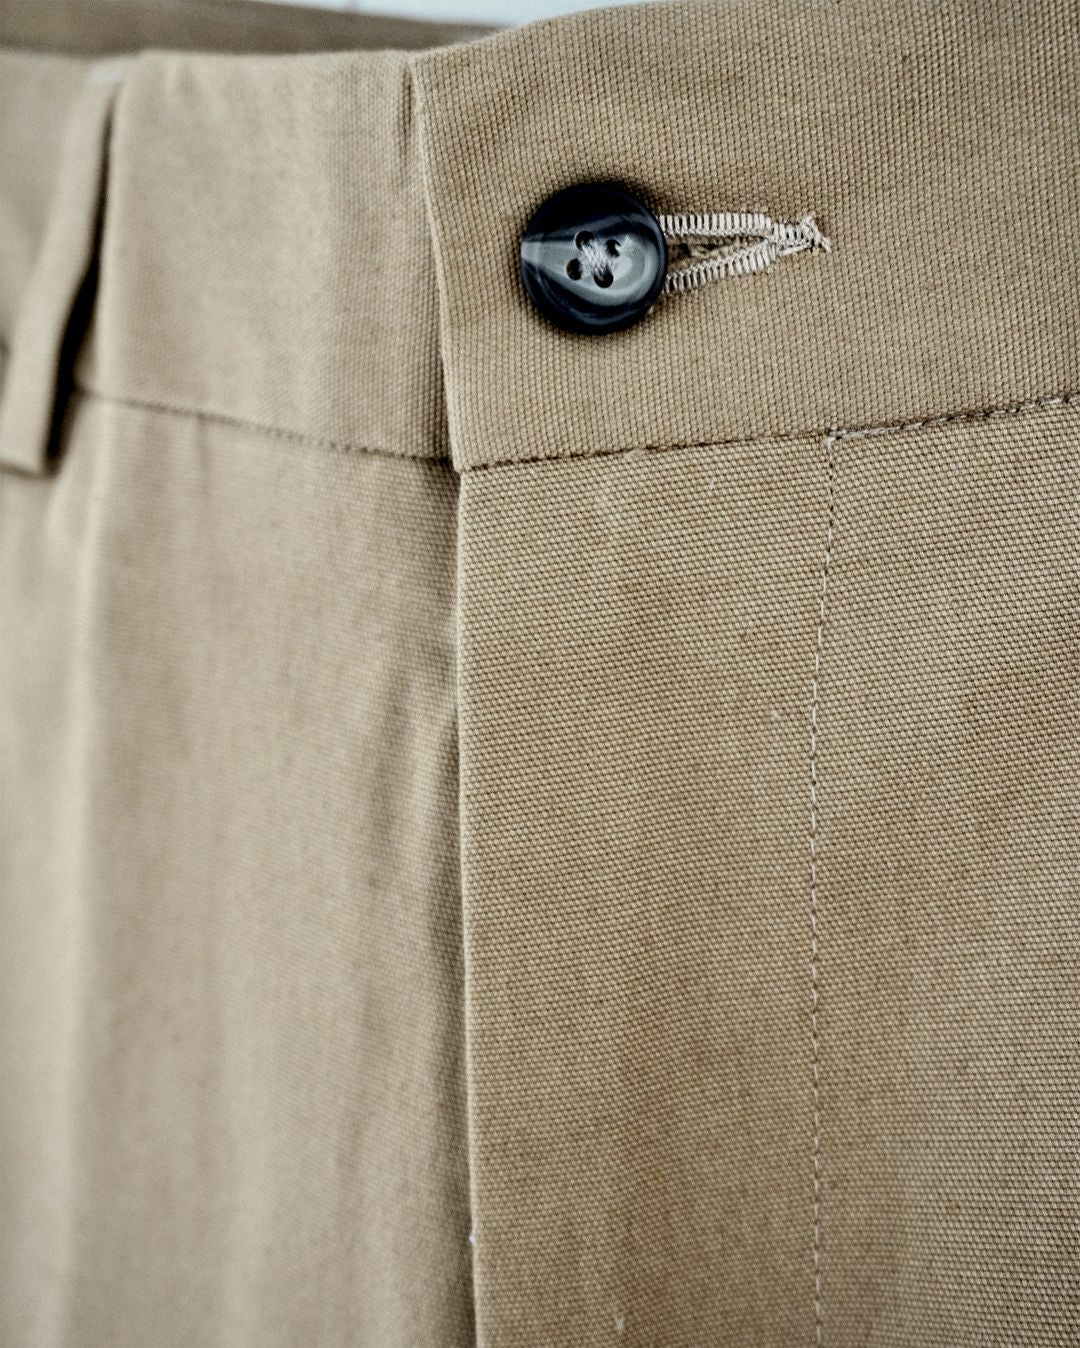 Washed Canvas Pant in Khaki (Sumpter Flat Front) by Charleston Khakis